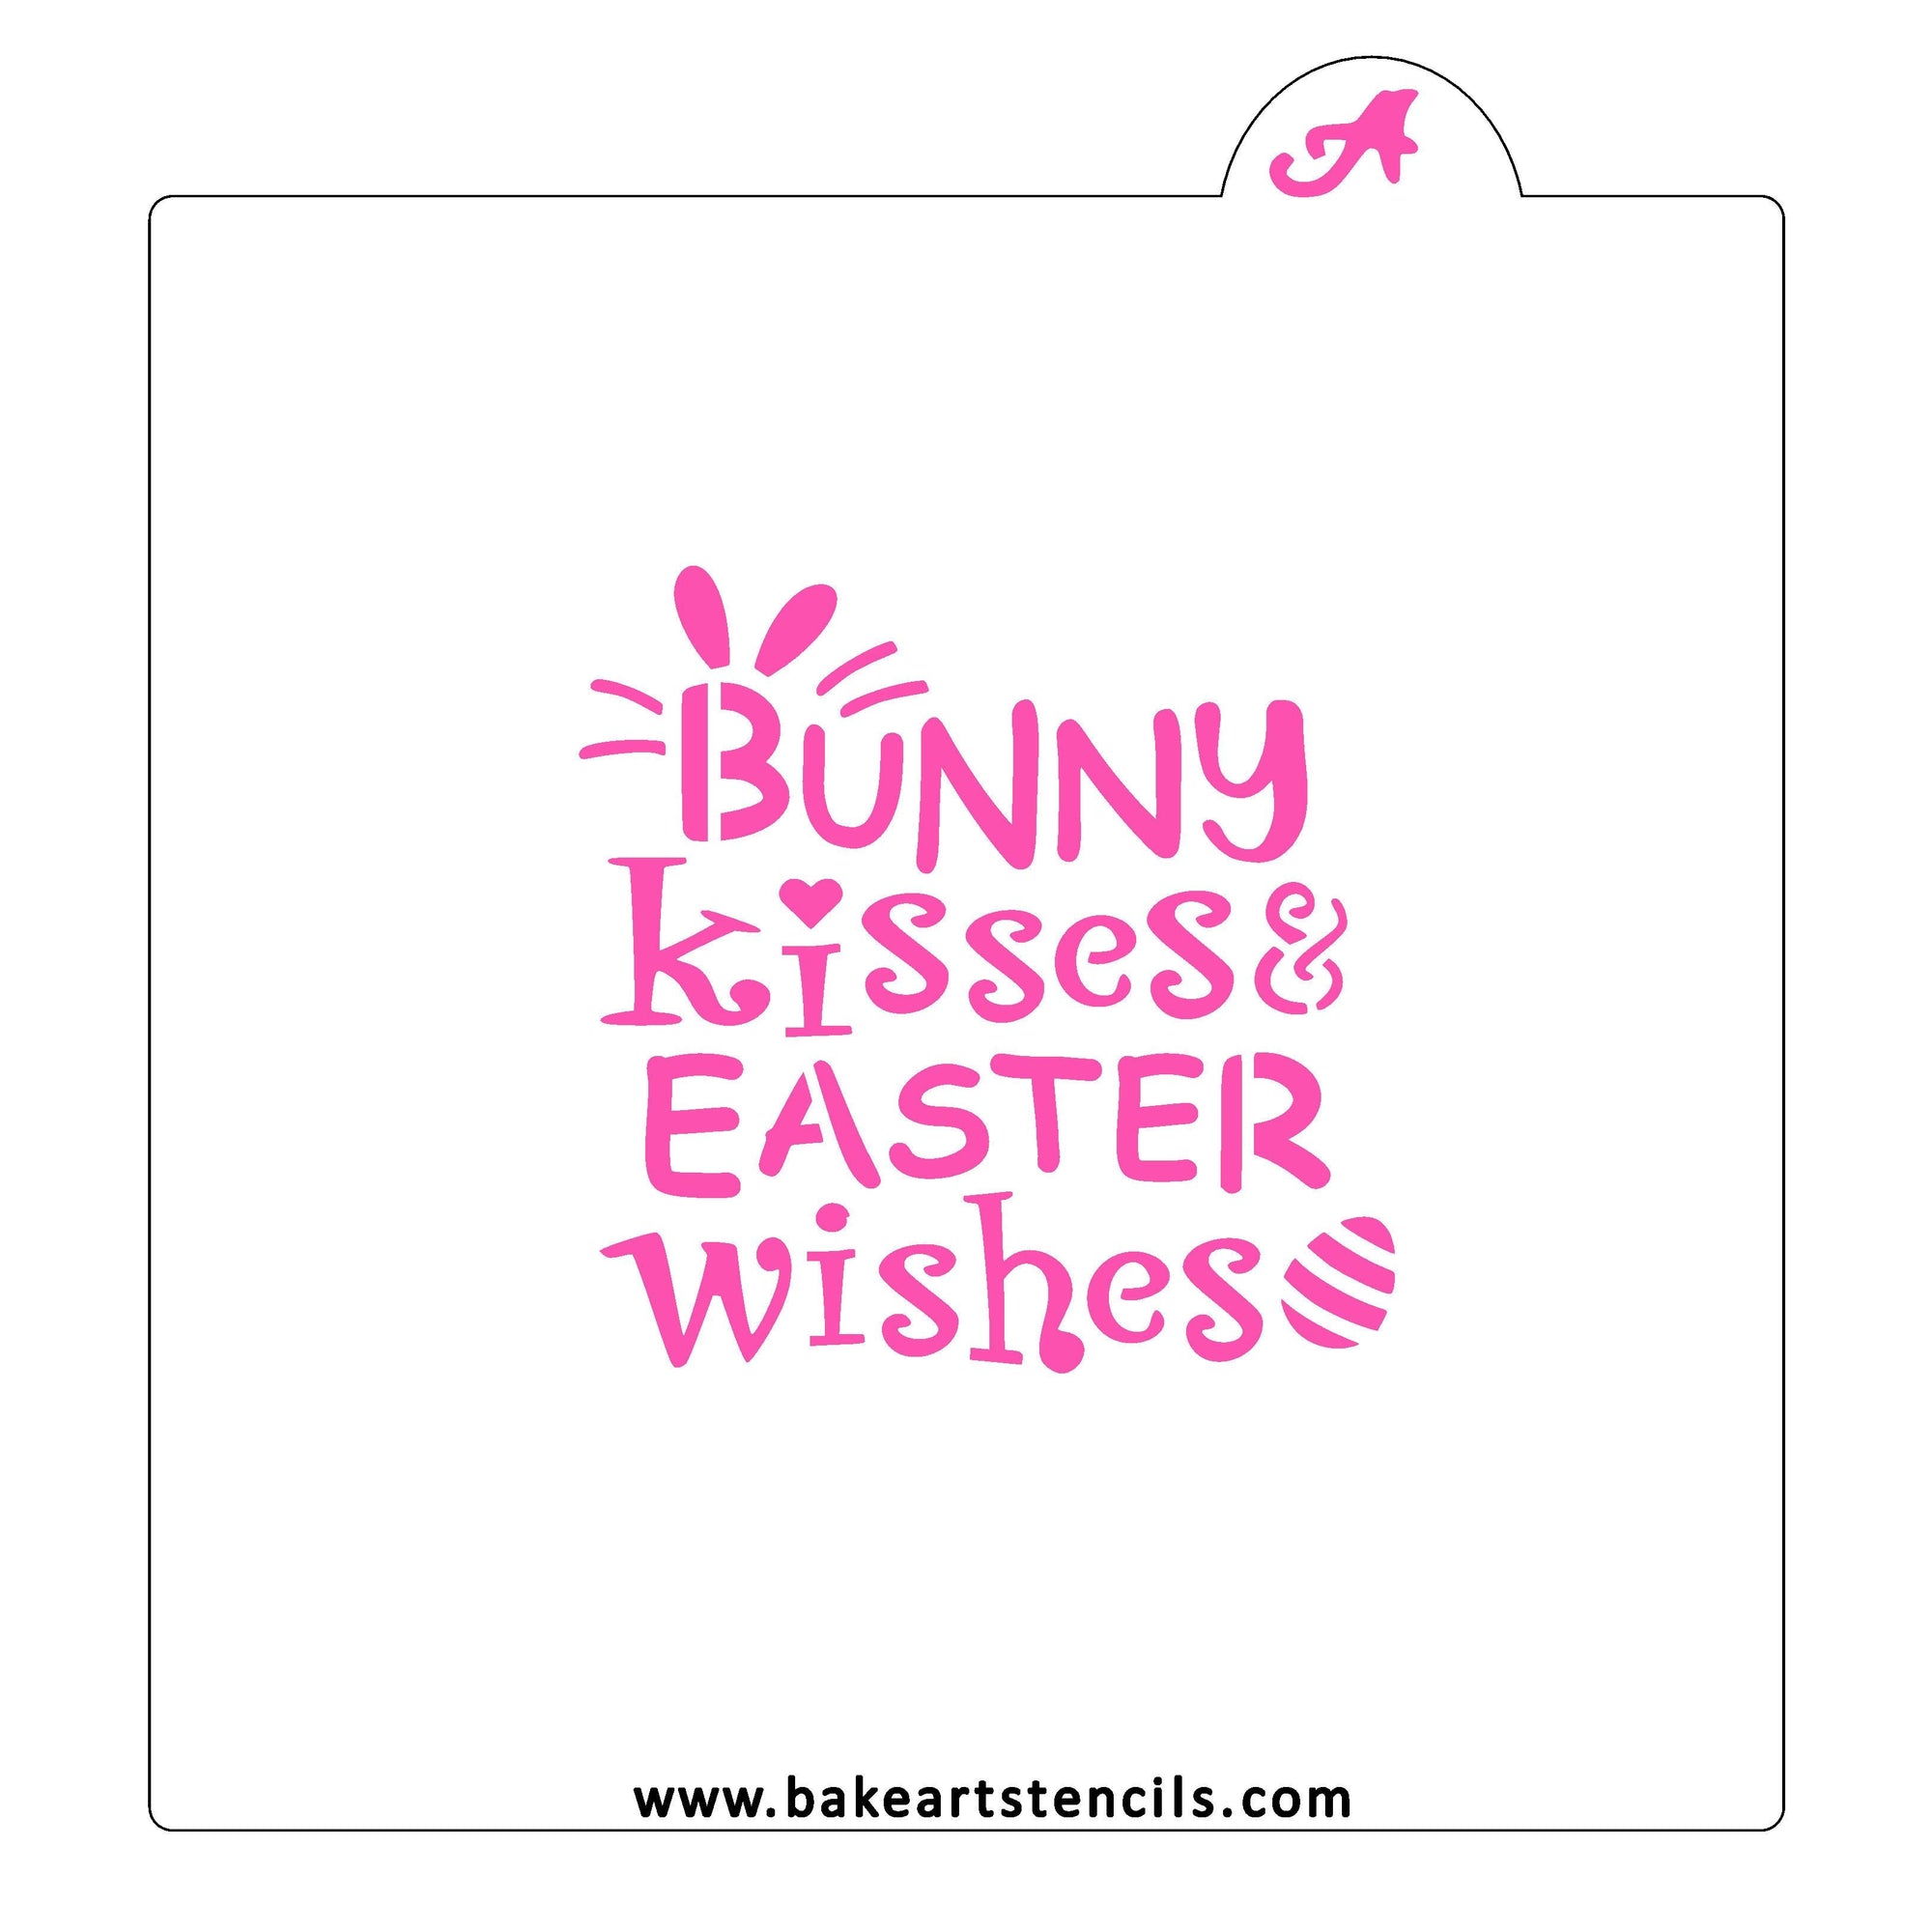 Bunny Kisses Easter Wishes Cookie Stencil bakeartstencil